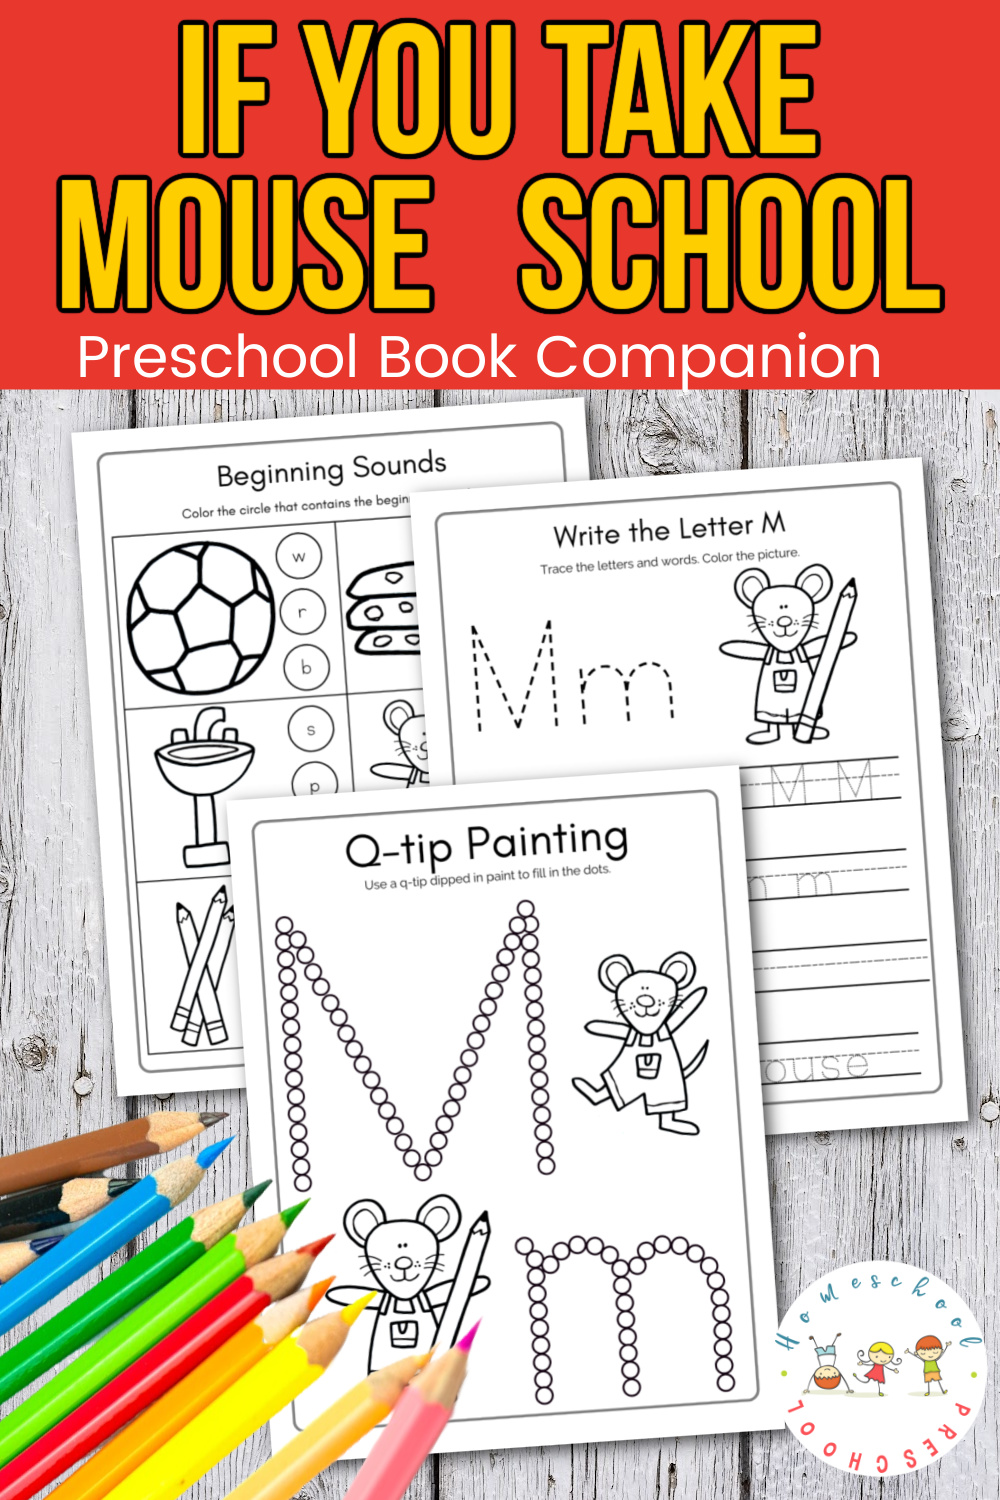 iytamts-activities Activities for If You Take a Mouse to School